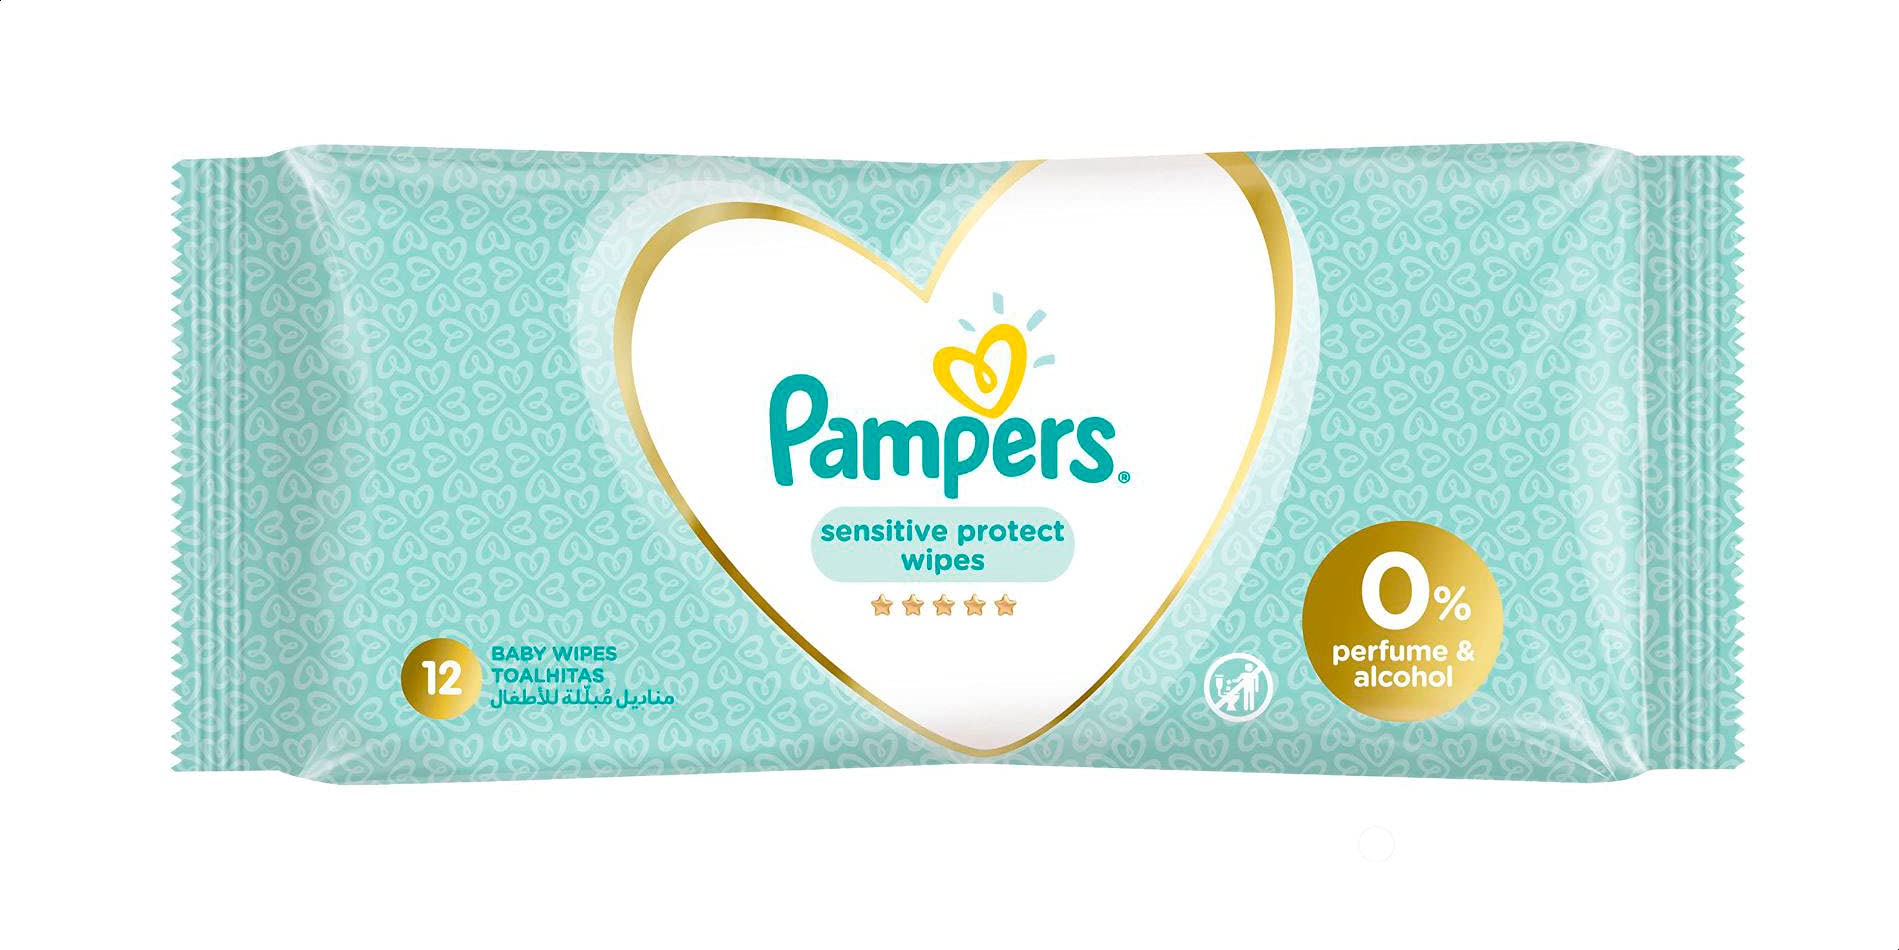 pampers pants a premium.care oabt